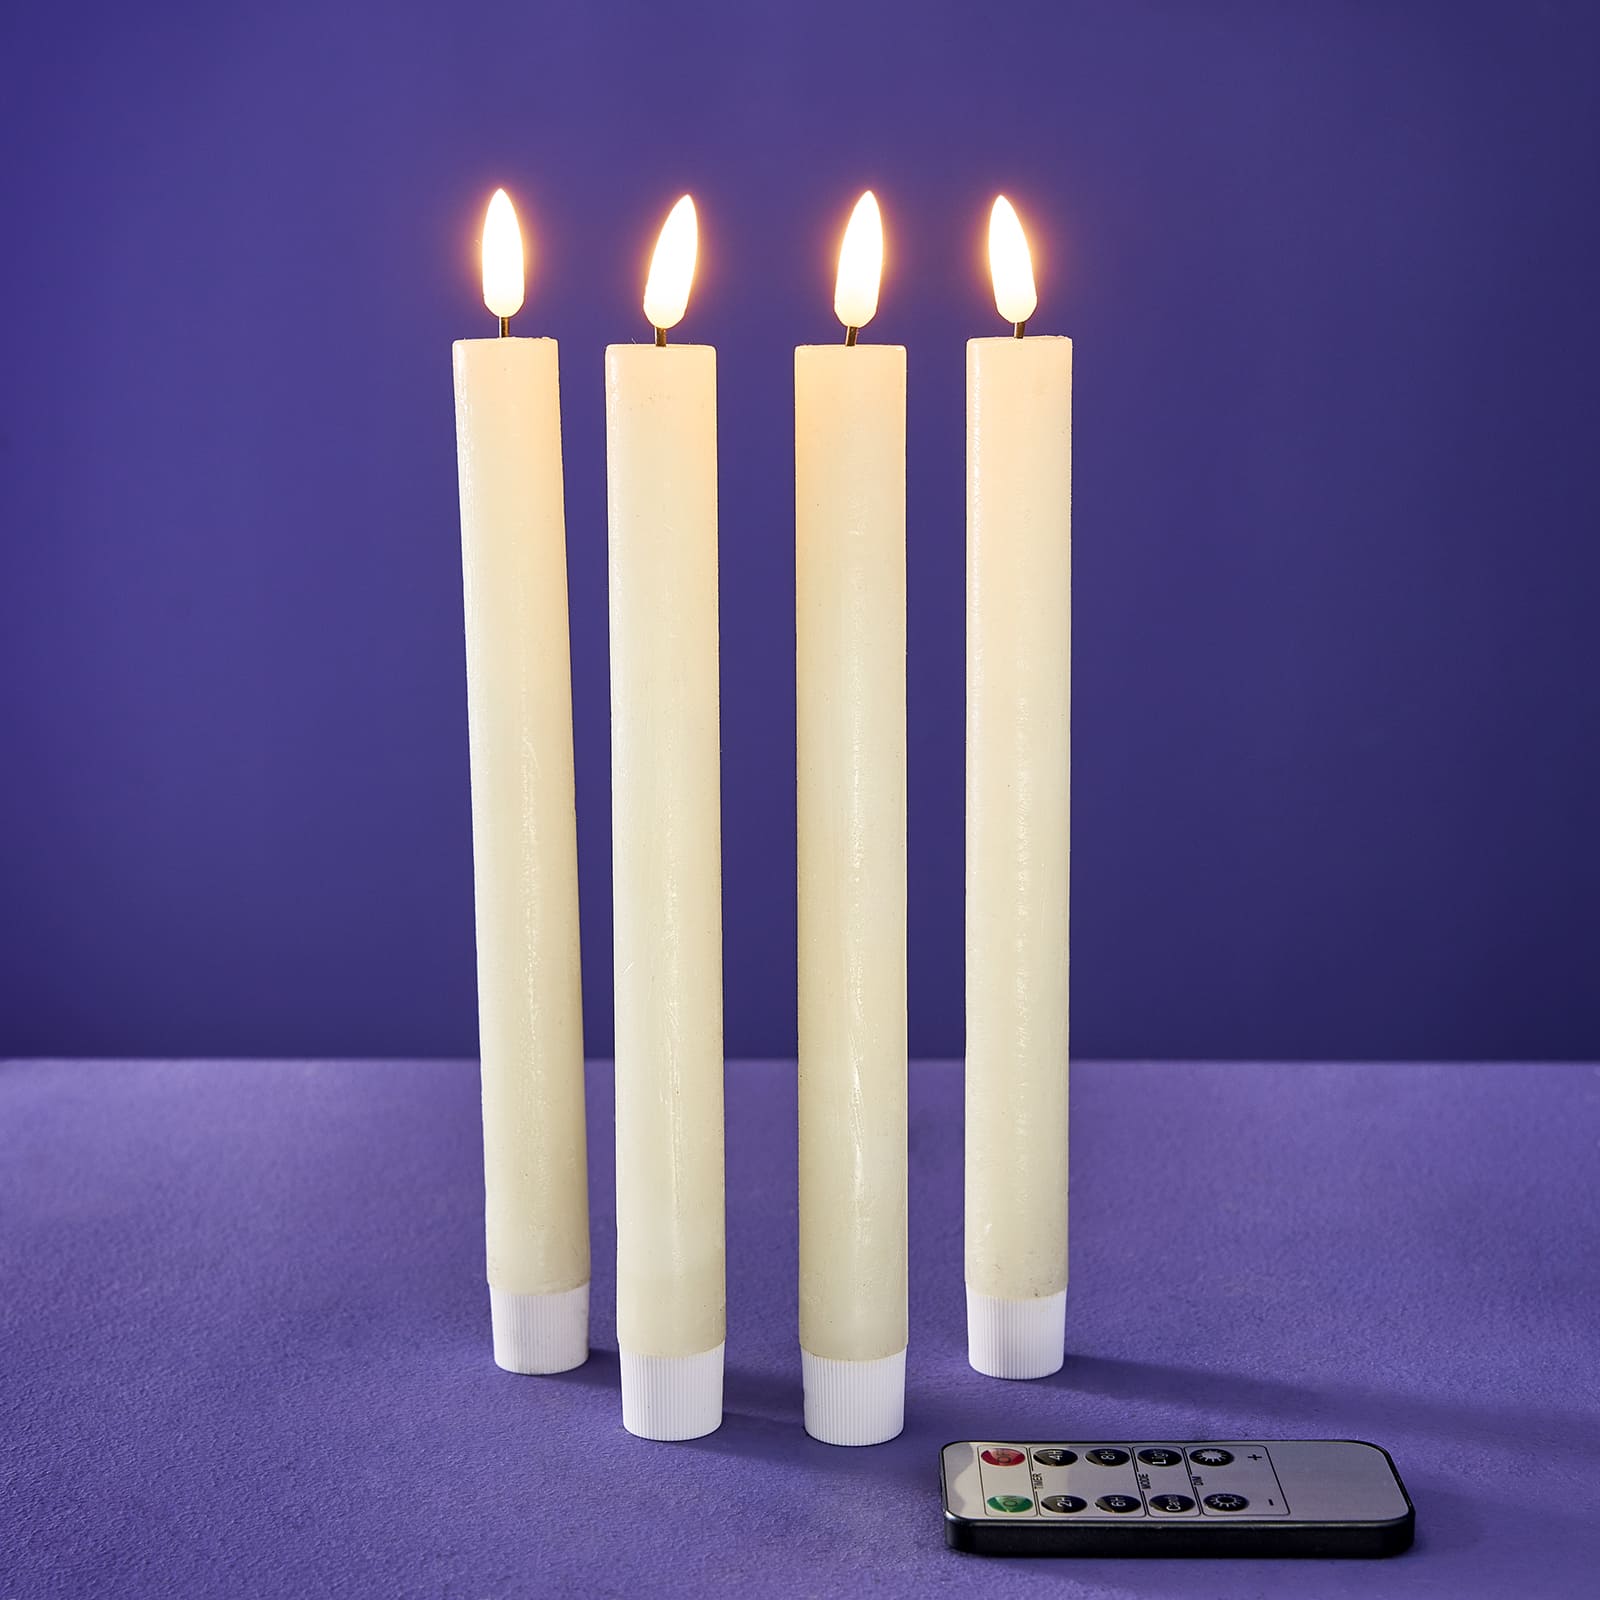 Quirky & unusual LED candles online | WERNS